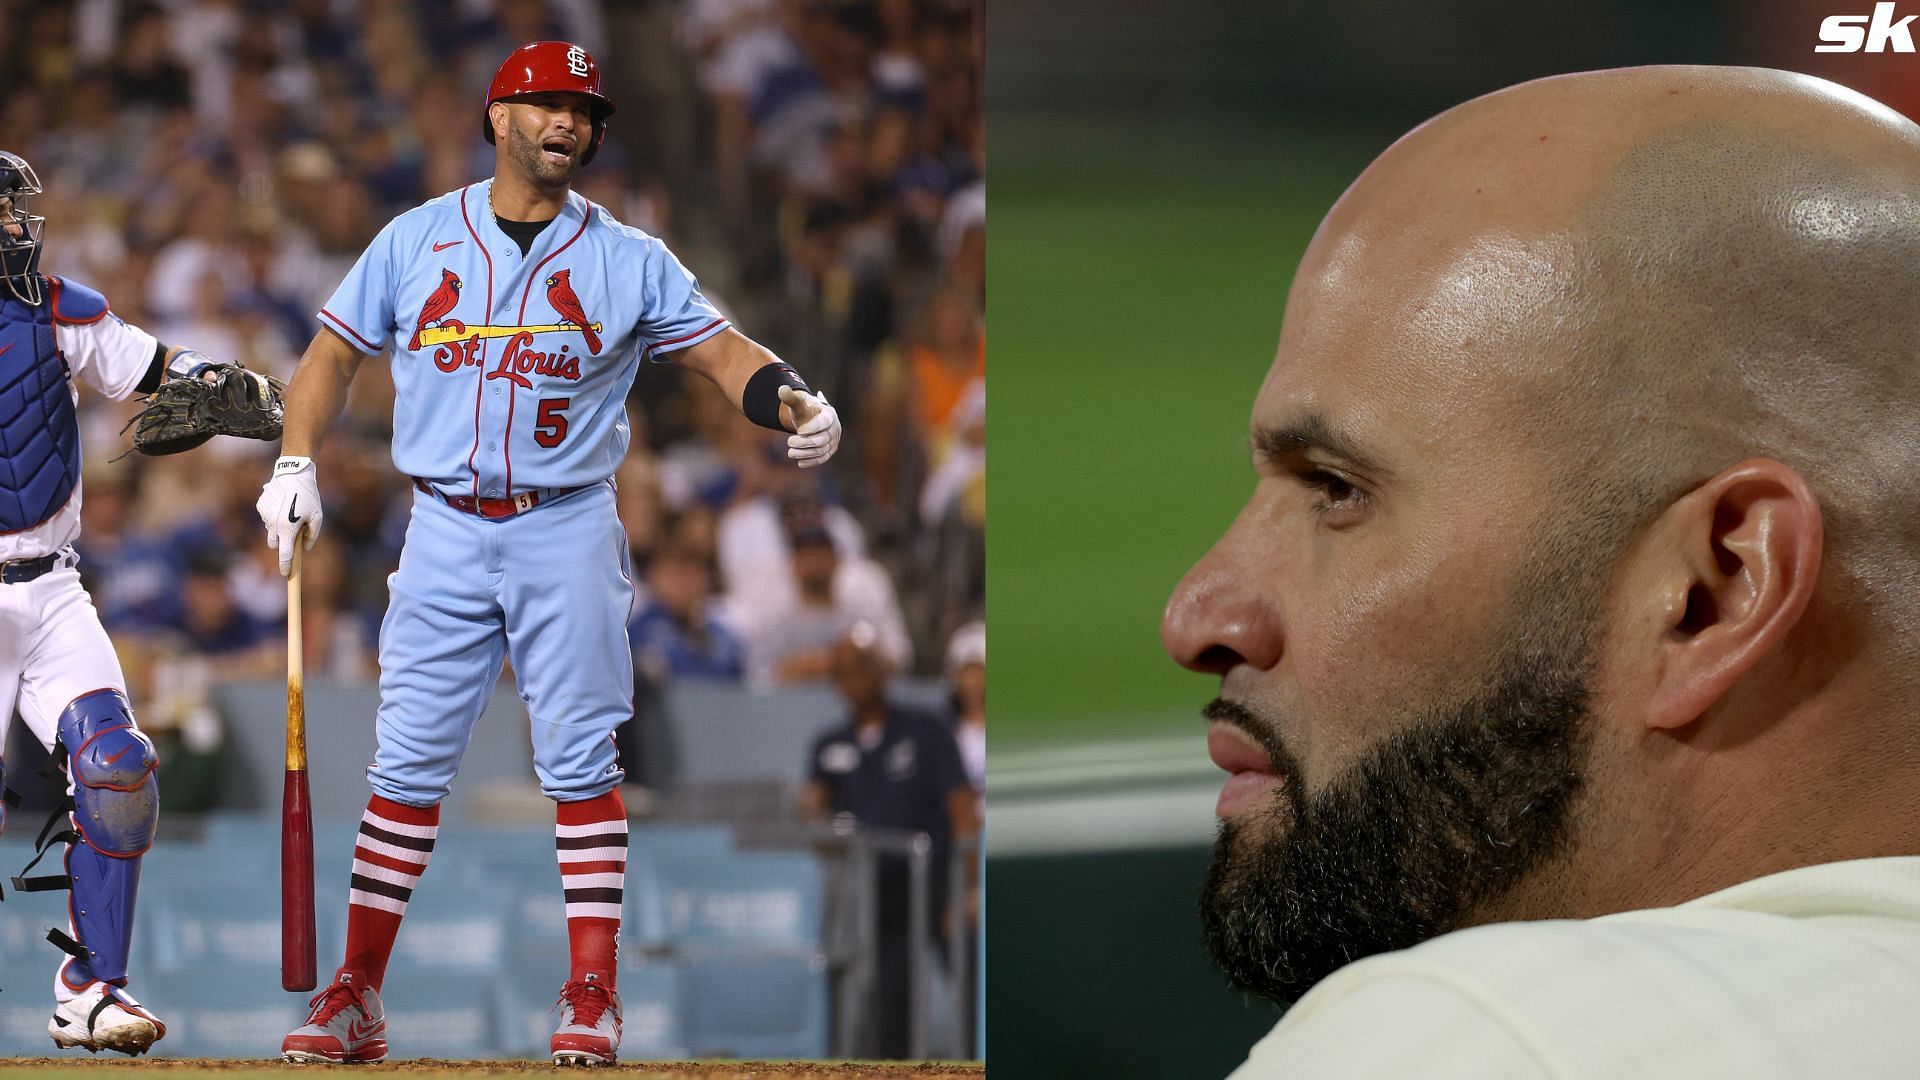 Albert Pujols of the St. Louis Cardinals looks on from the dugout against the Philadelphia Phillies